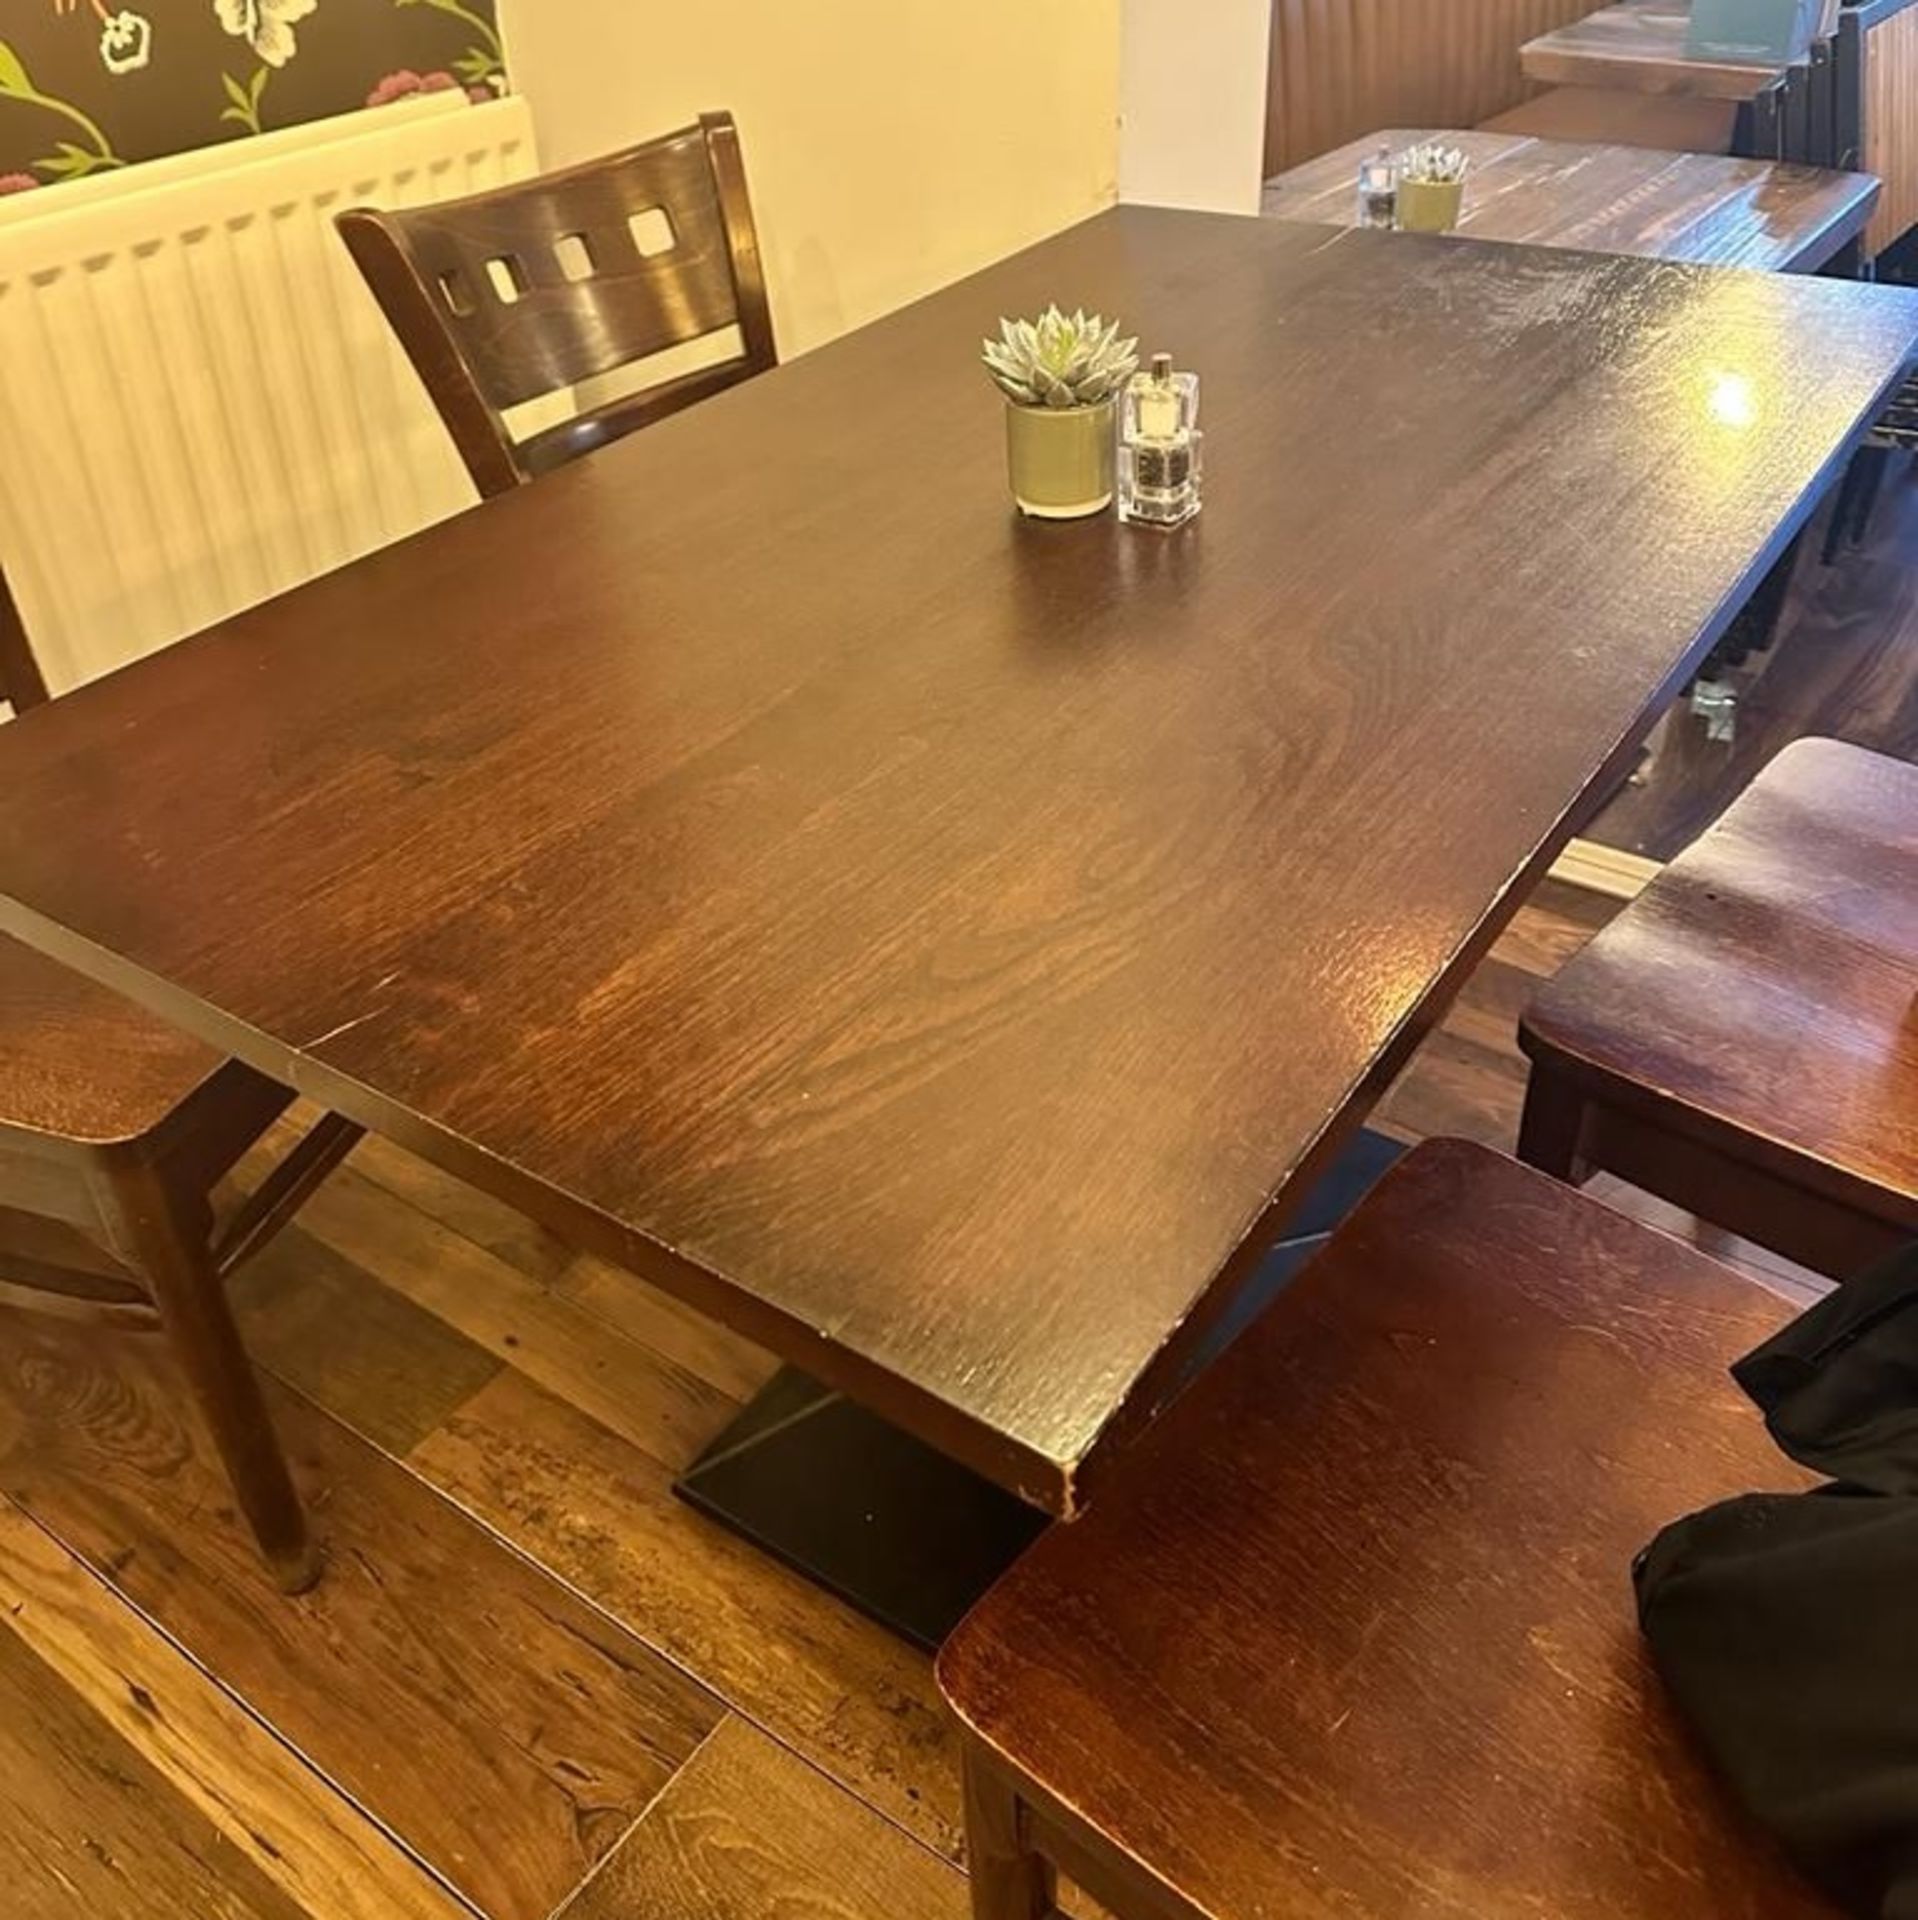 1 x Restaurant Dining Table - Size: W120 x D70 cms - Image 2 of 2